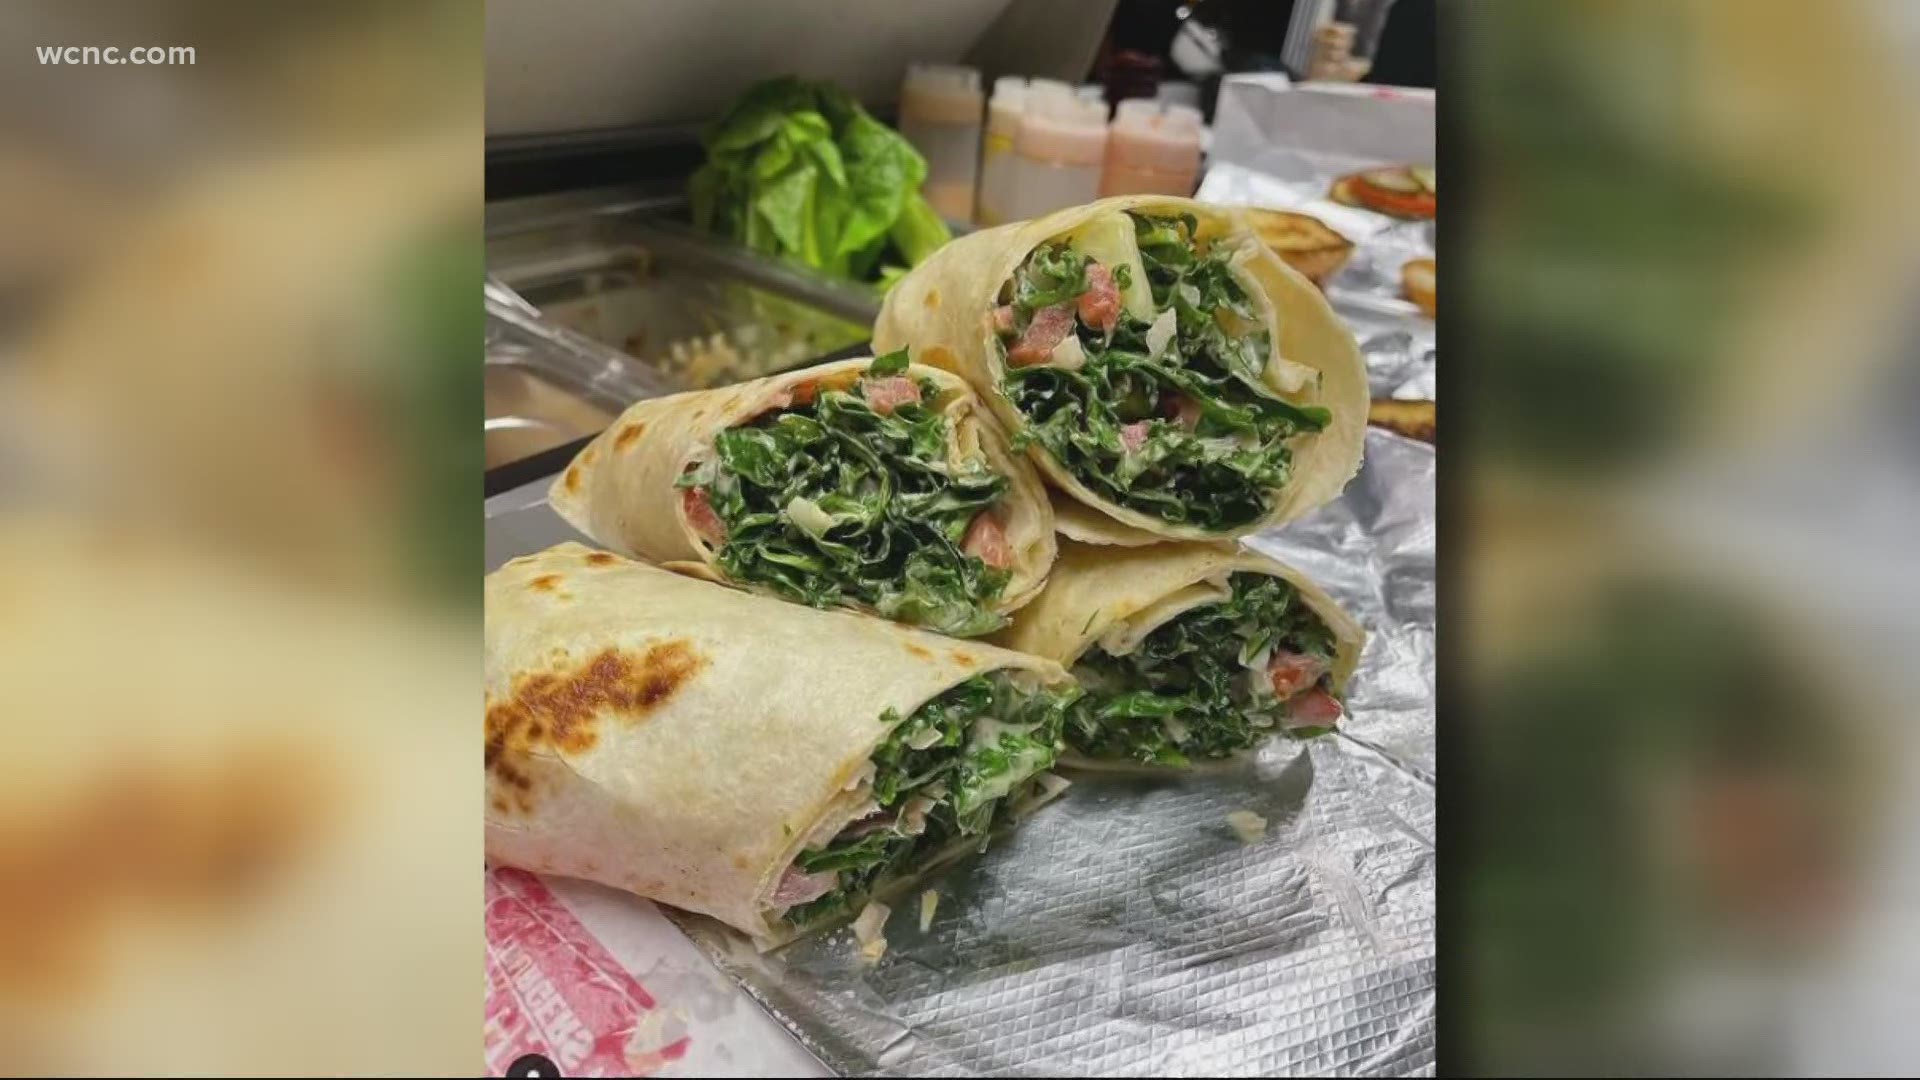 The vegan food truck has been open for less than a month but has been so popular that they've had a hard time finding a location that will host them.